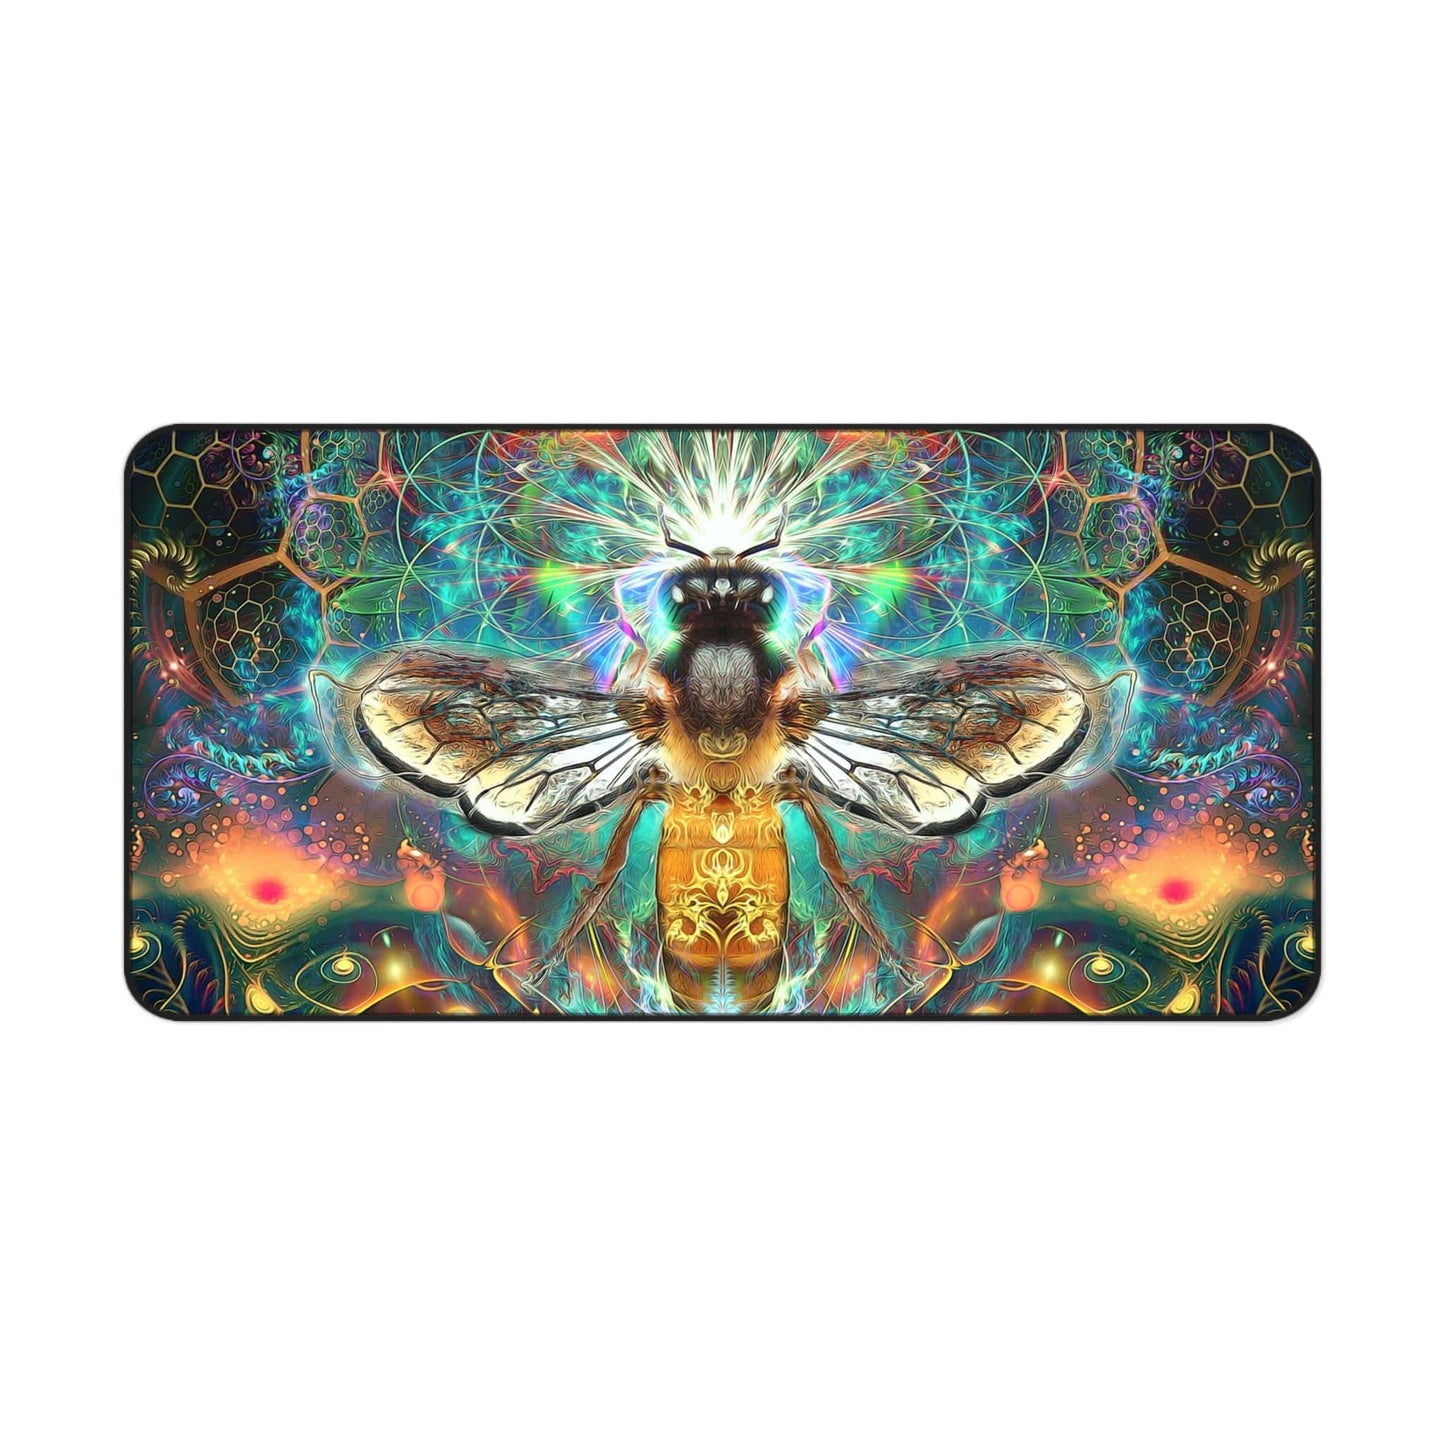 "To Bee or Not to Bee - [Bee Section]" DESK MAT / MOUSE PAD (12x18)(12x22)(15.5x31)